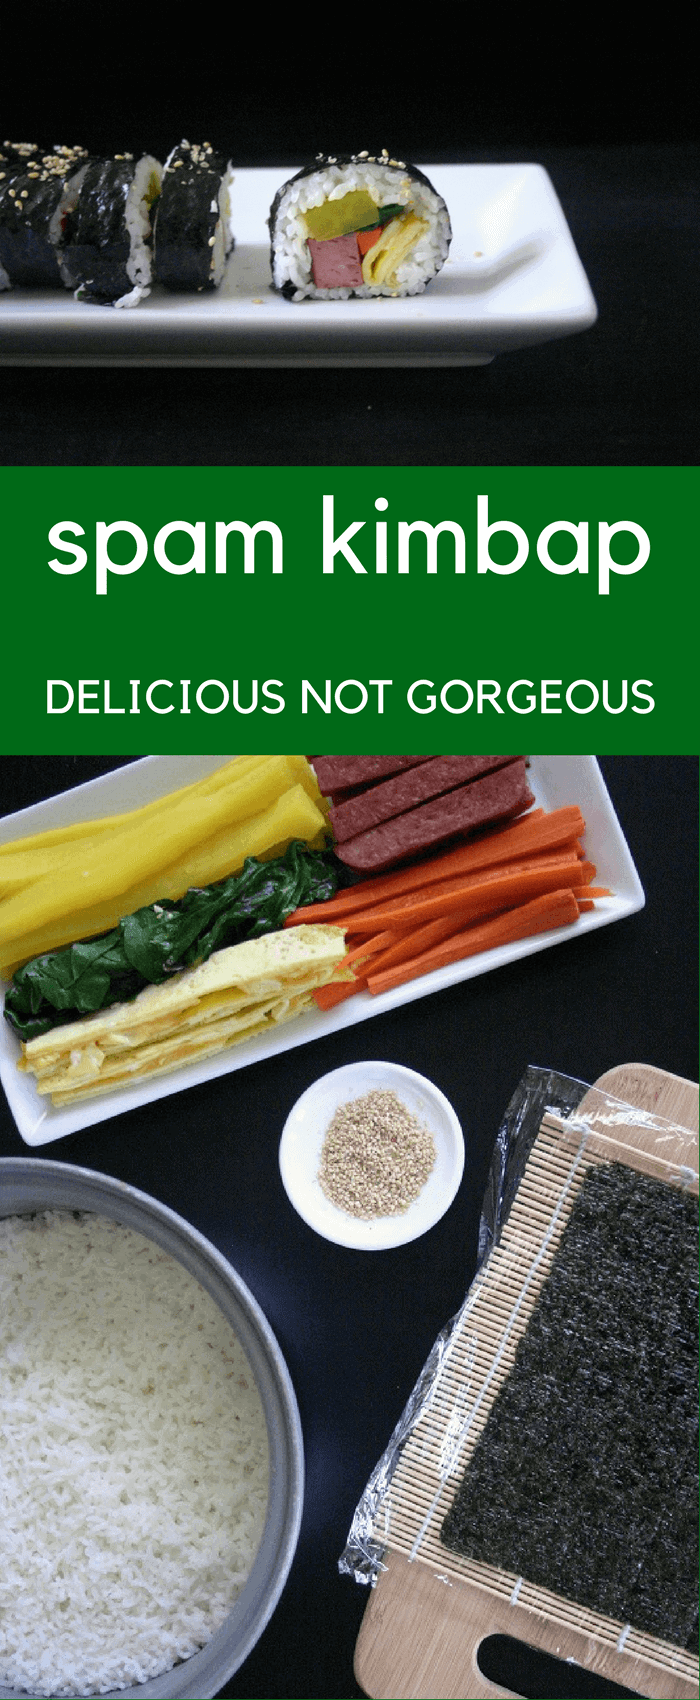 Spam kimbap, the cousin of Japanese sushi, is really tasty as a lunch or appetizer. #spam #kimbap #korean #sushi